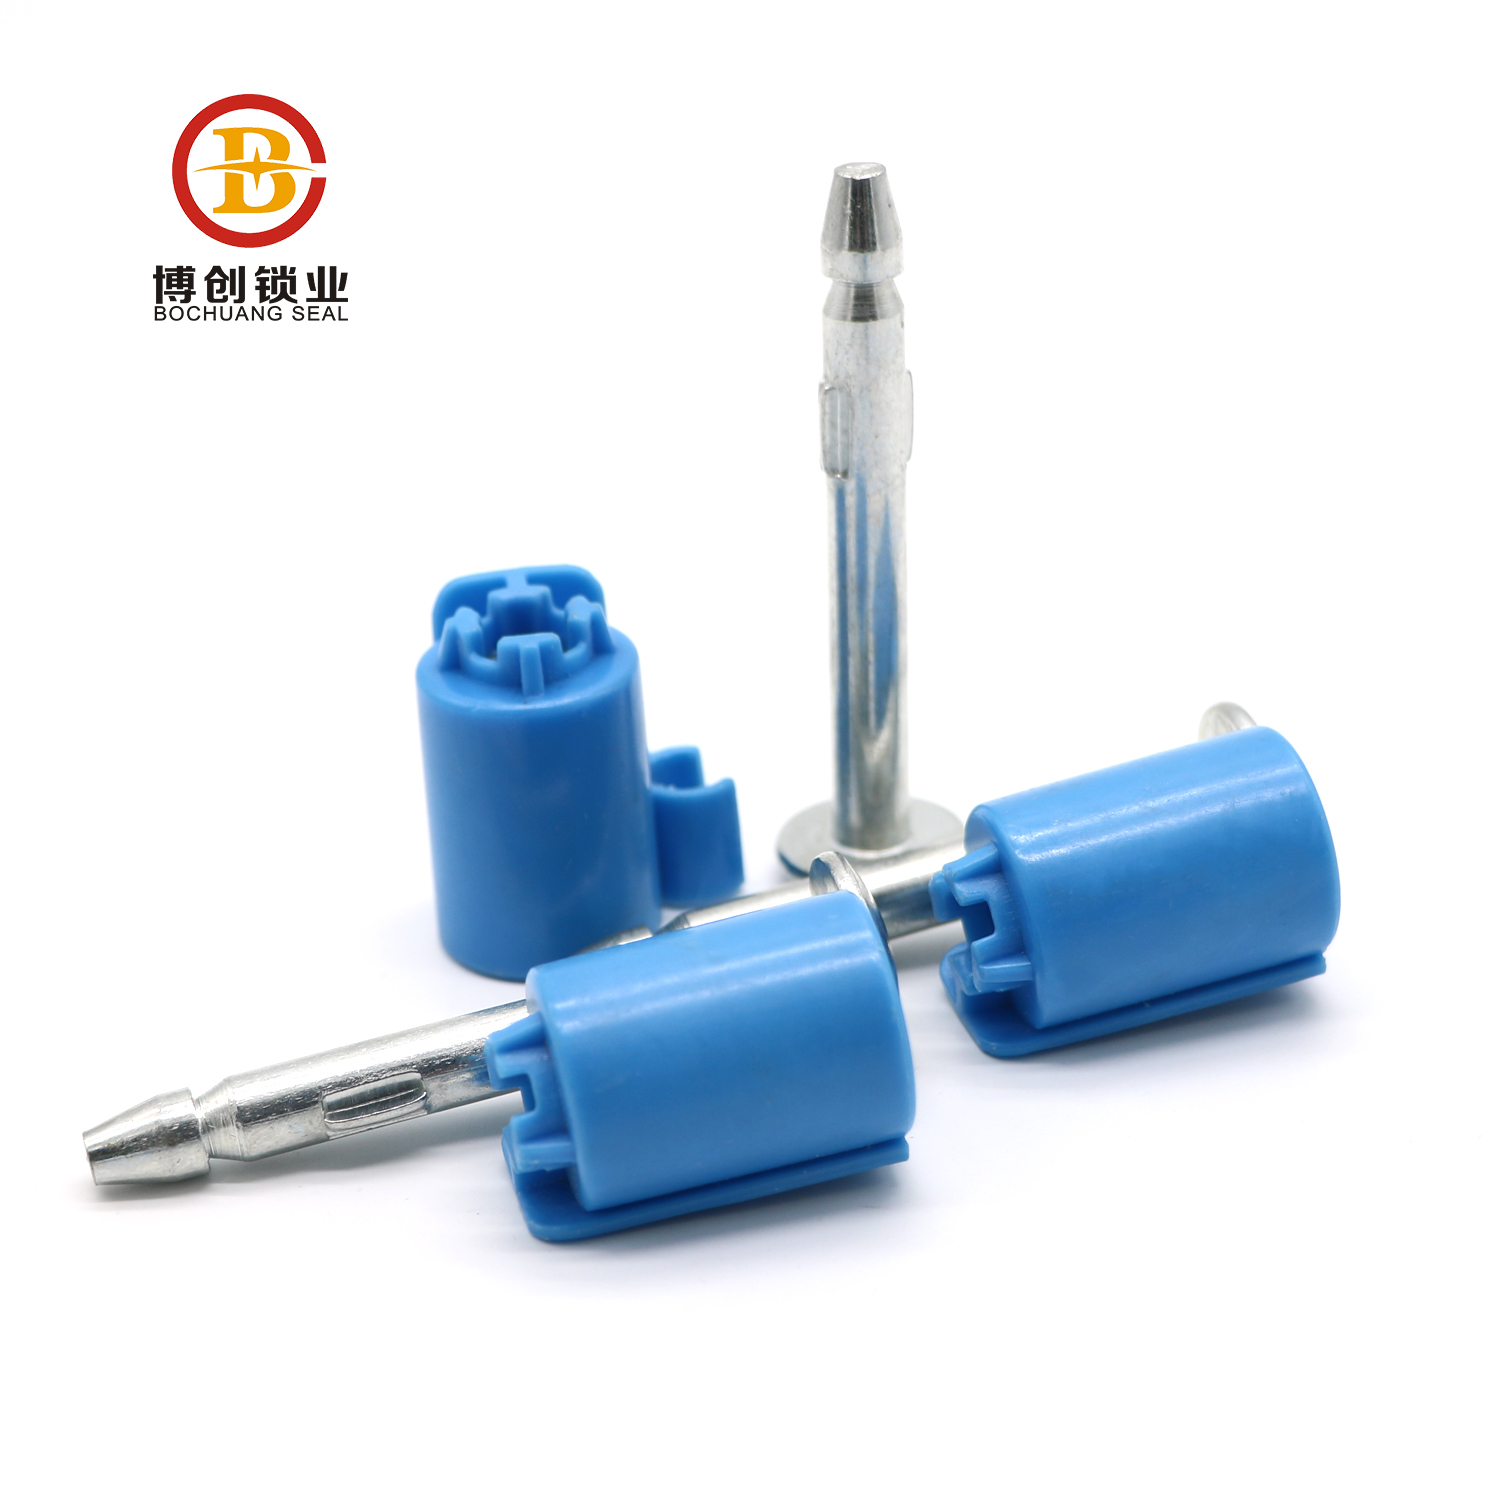 High quality bolt seals with trustworthy container and seal